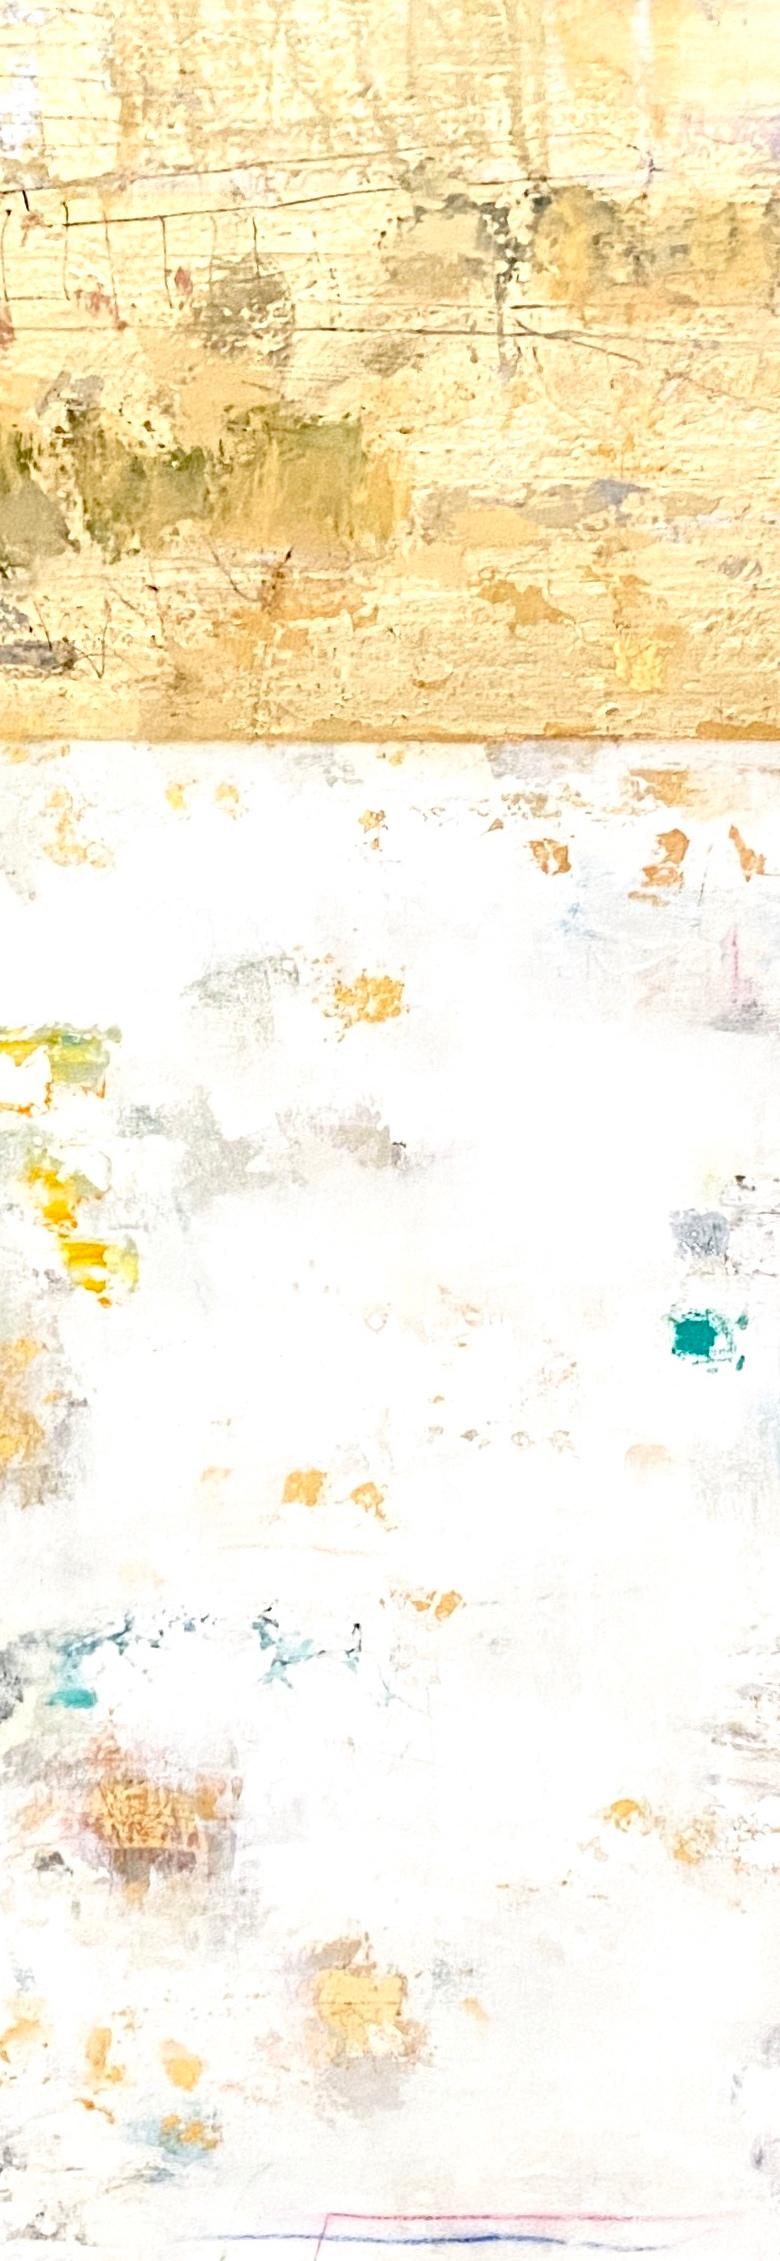 Gold and Color No. 87 - White Abstract Painting by Takefumi Hori